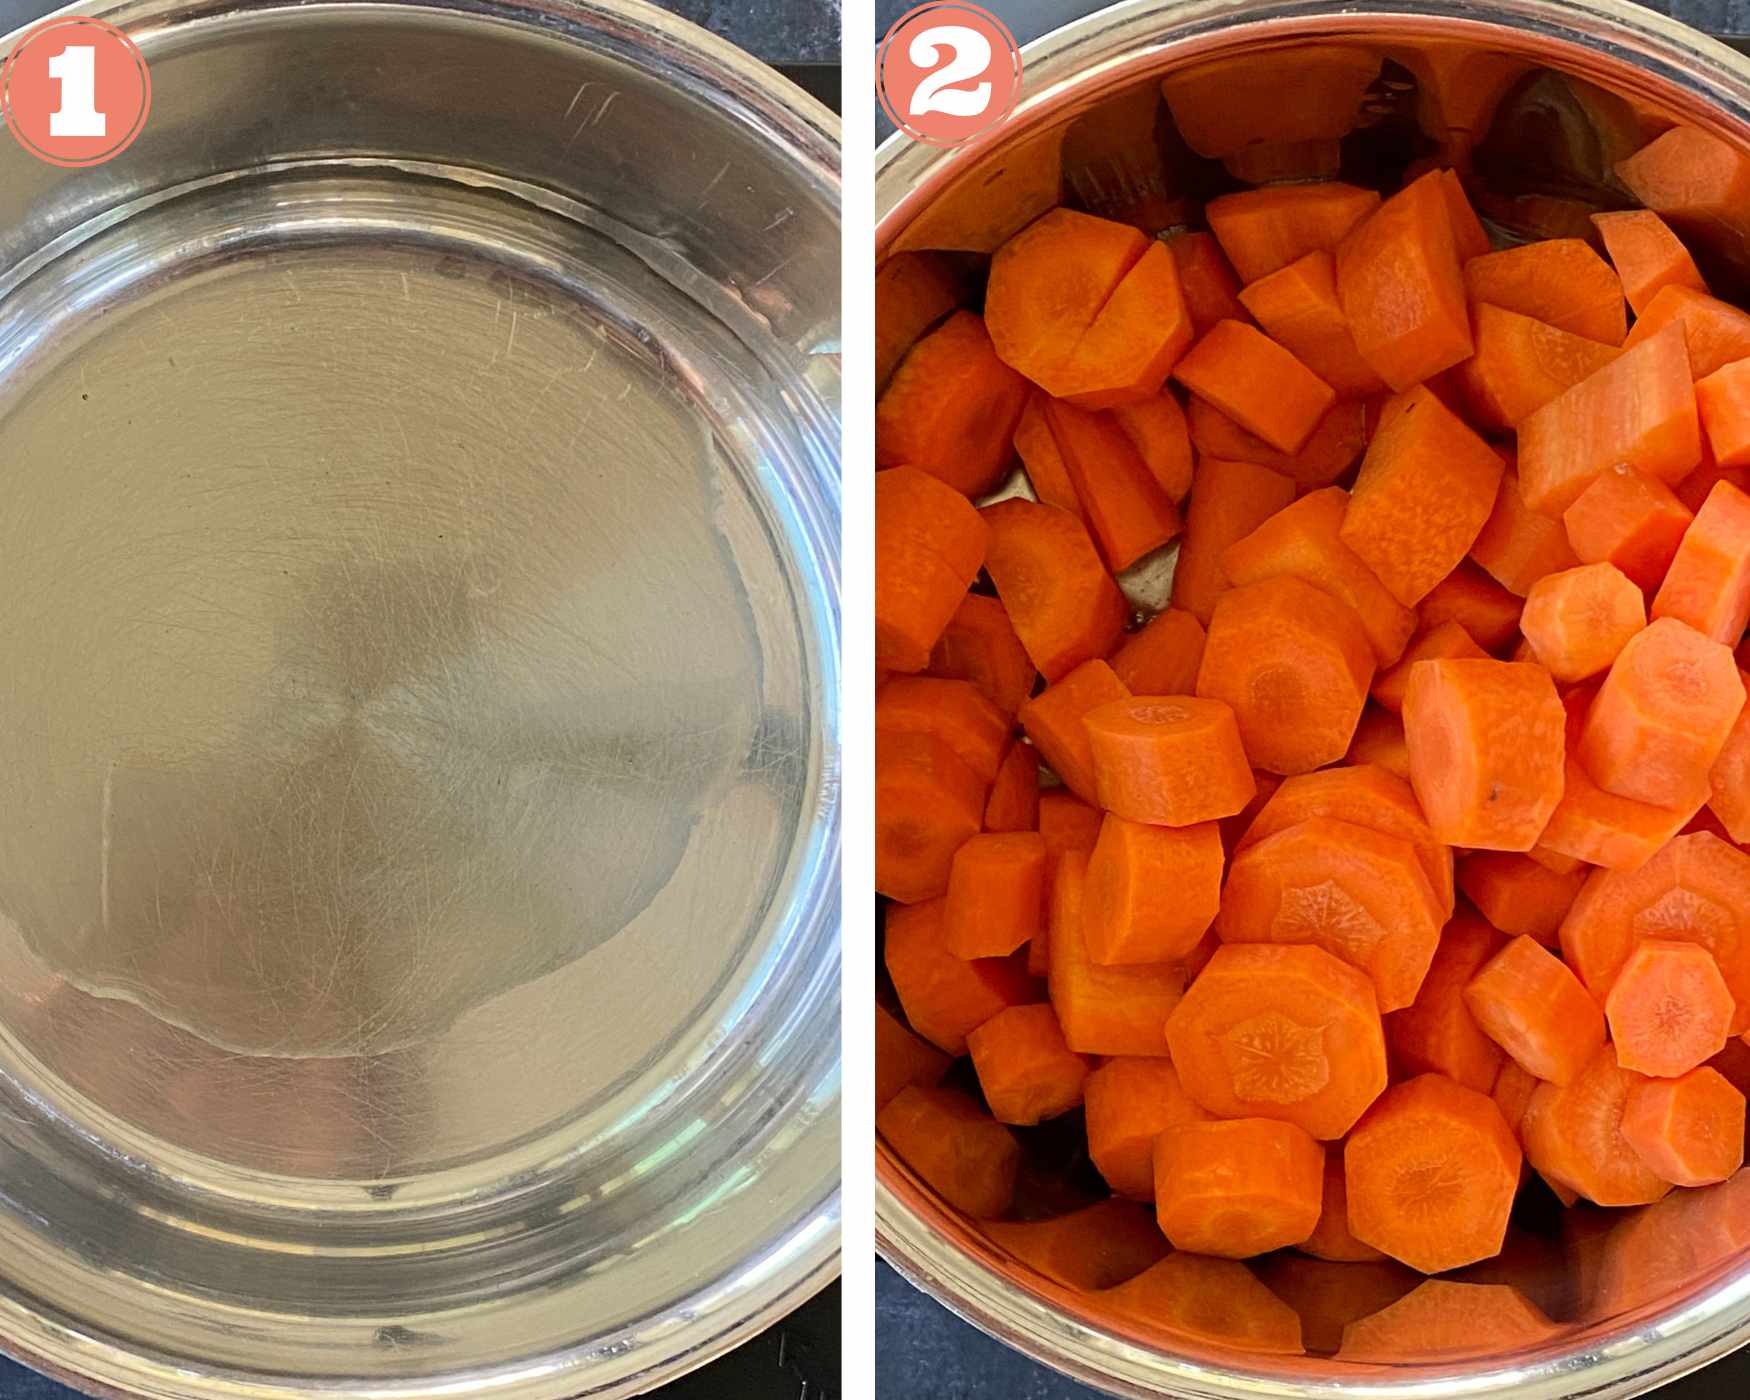 Heat ghee in a pressure cooker and add carrot slices to it.